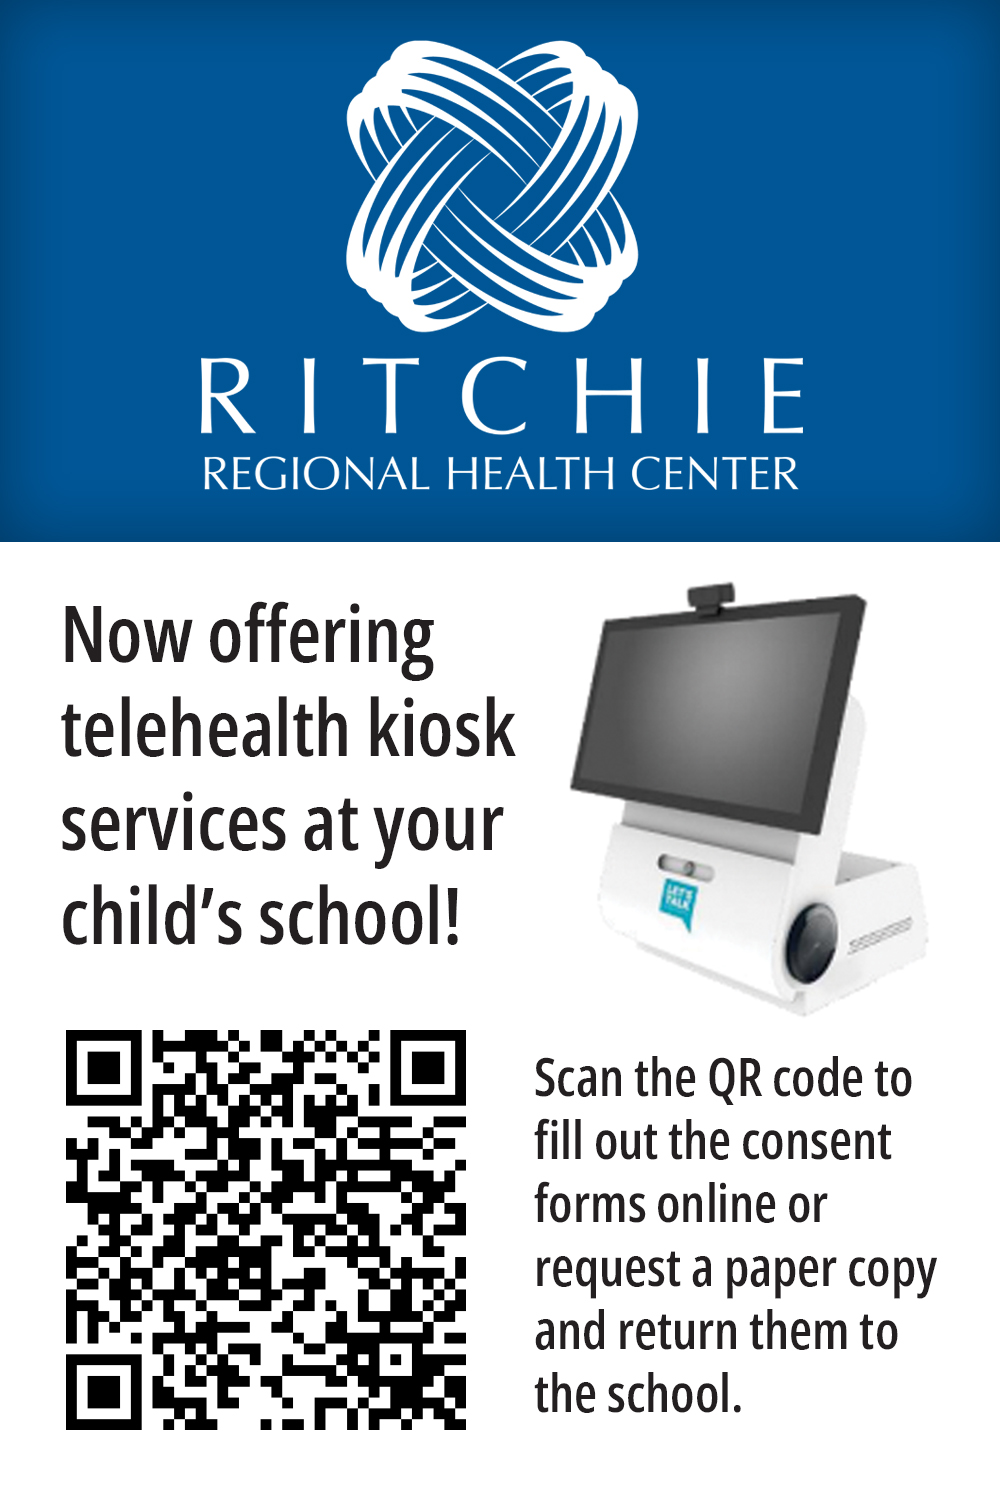 ad for telehealth by Ritchie Regional Health Center showing a  QR code and kiosk  